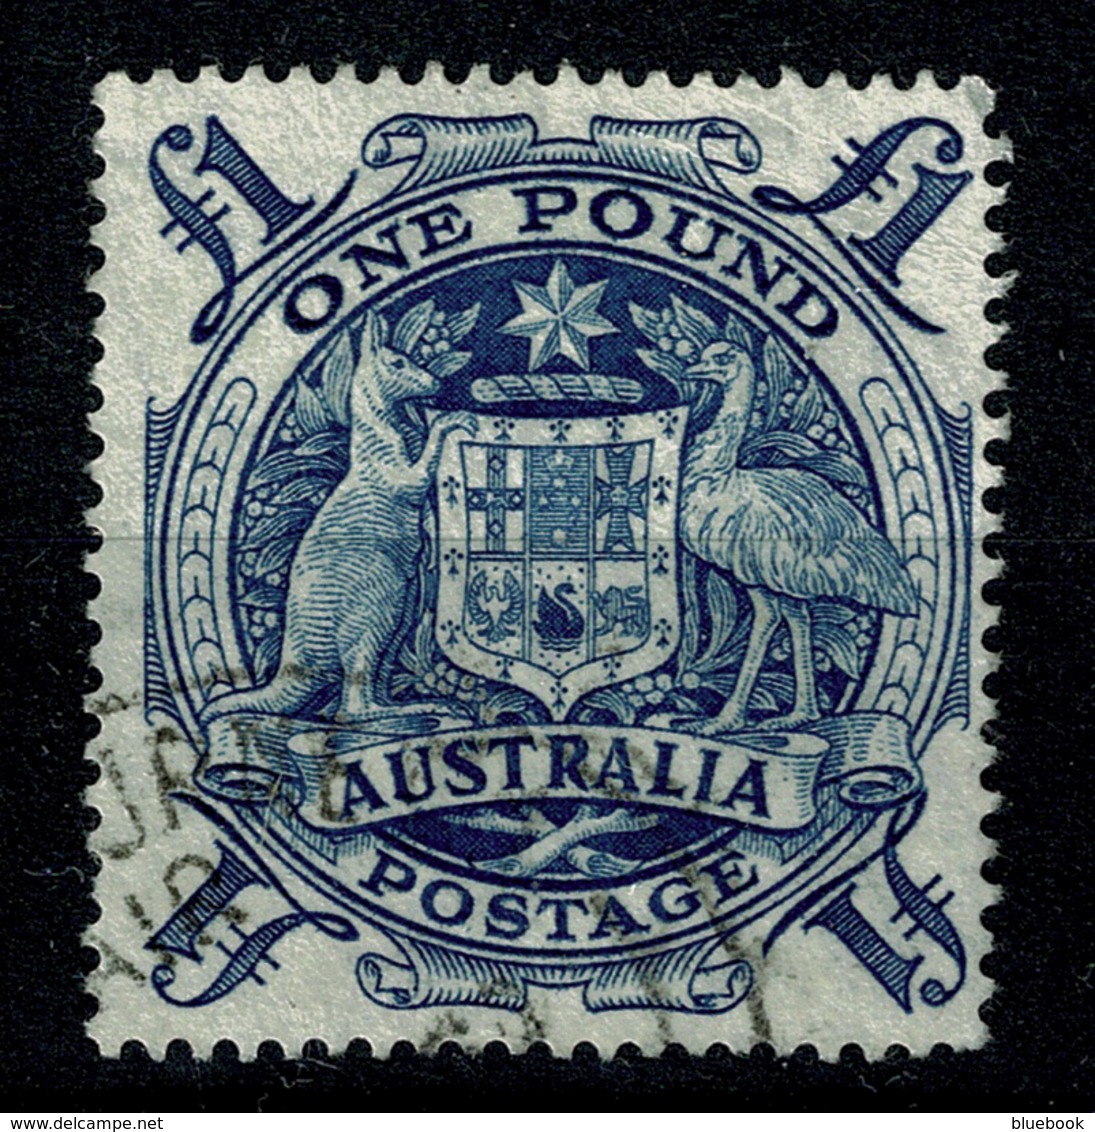 Ref 1234 - Australia 1946 Stamp SG 224c - £1 Arms Good Used - Used Stamps